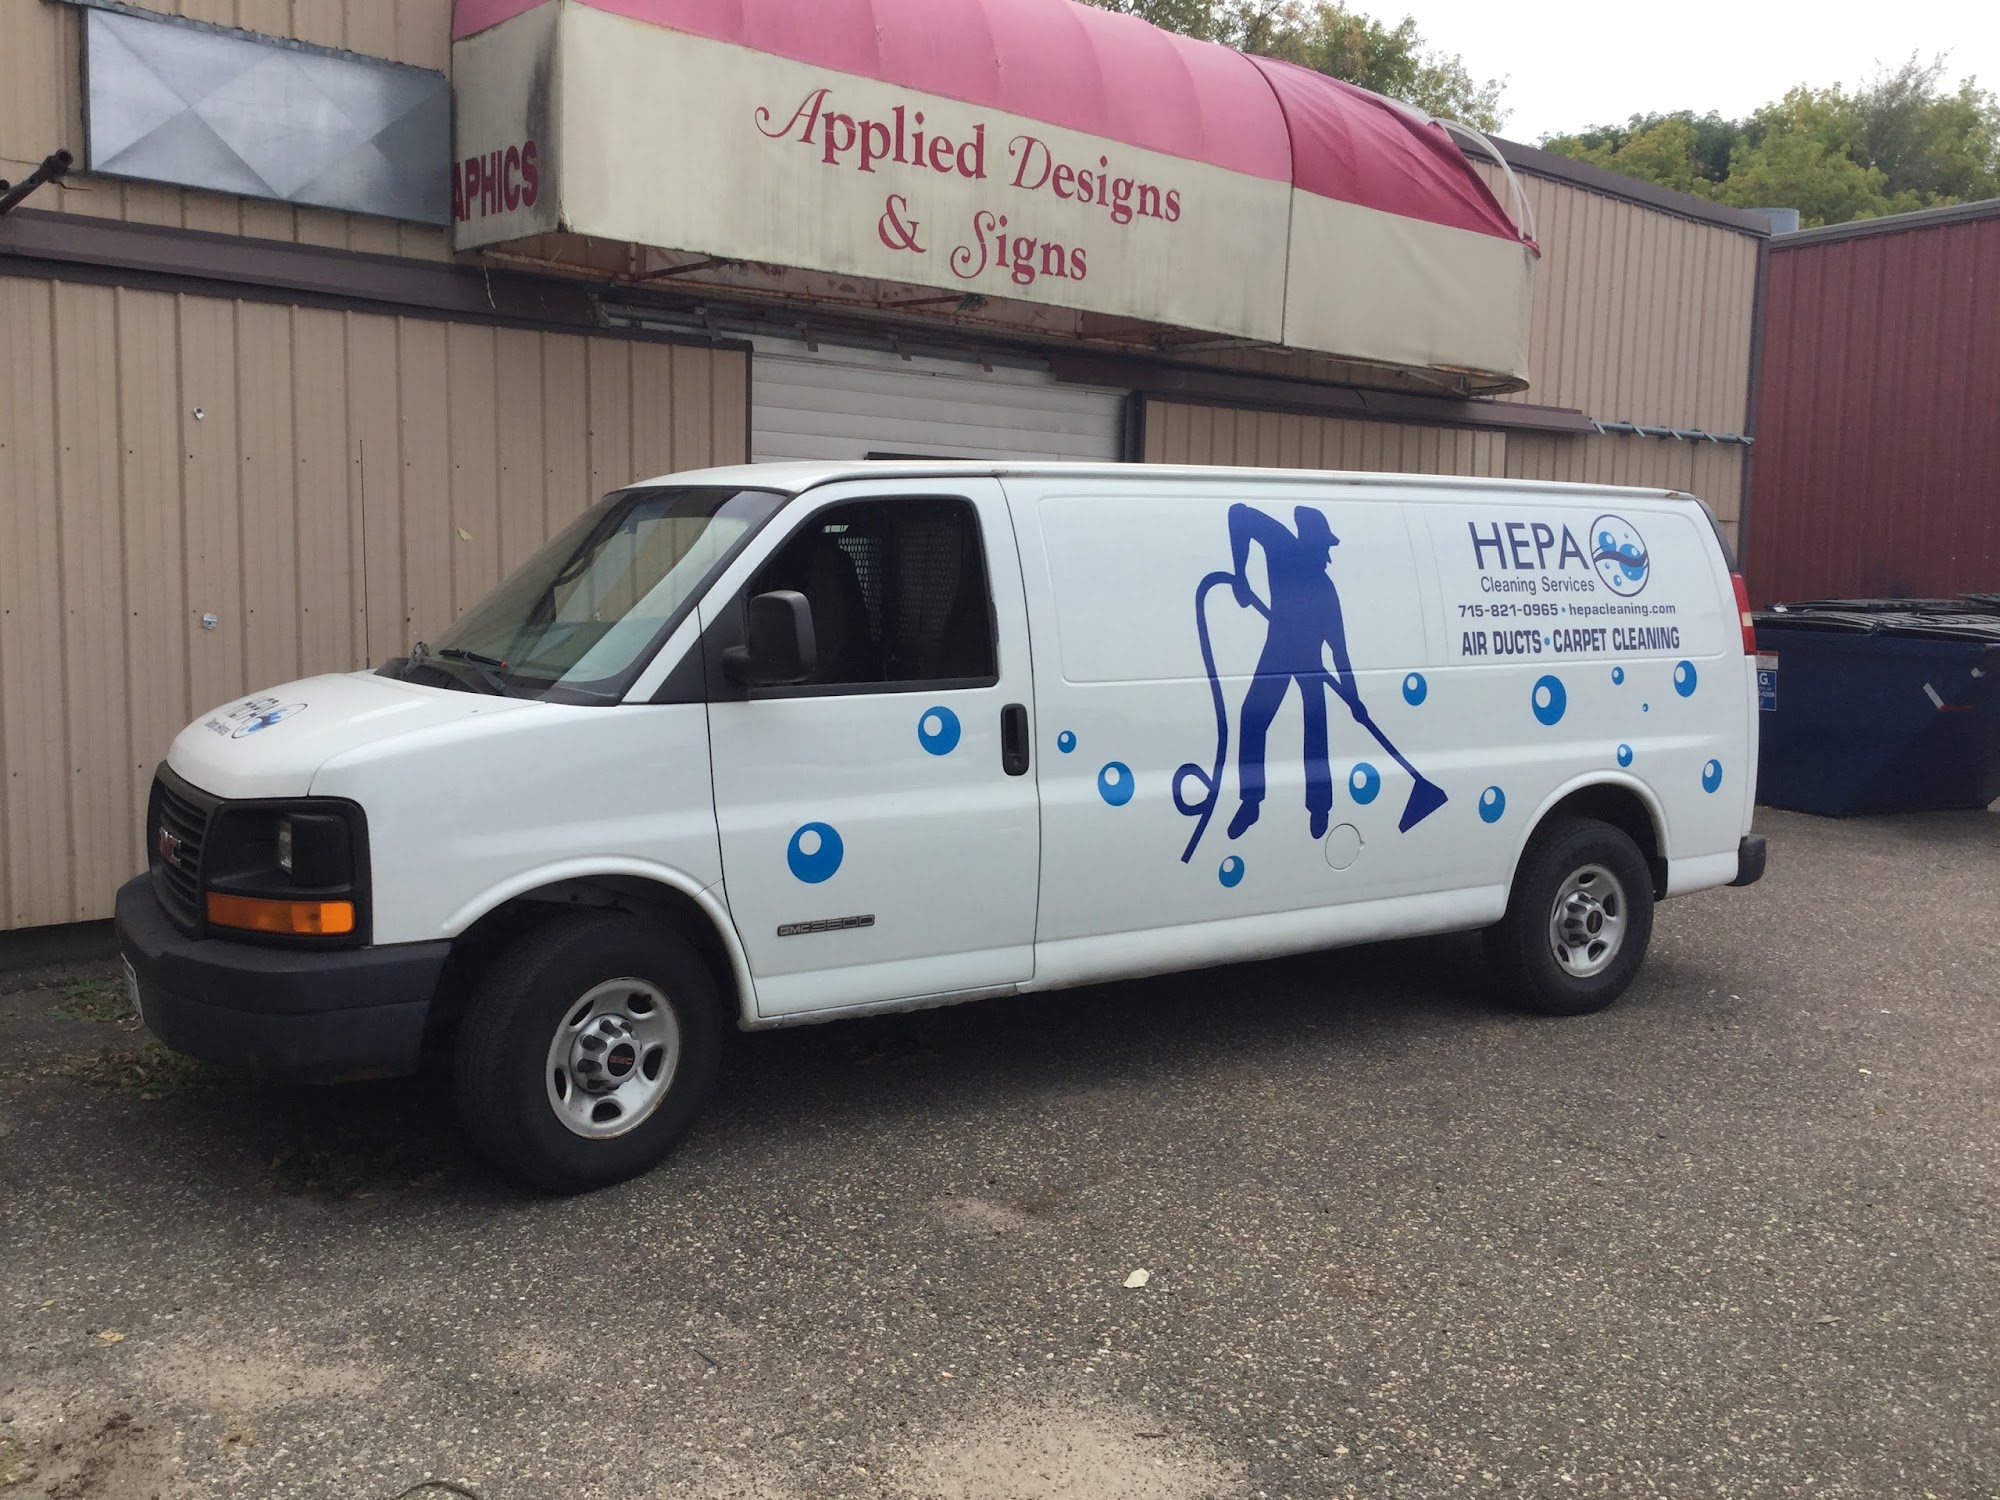 Hepa Cleaning Services